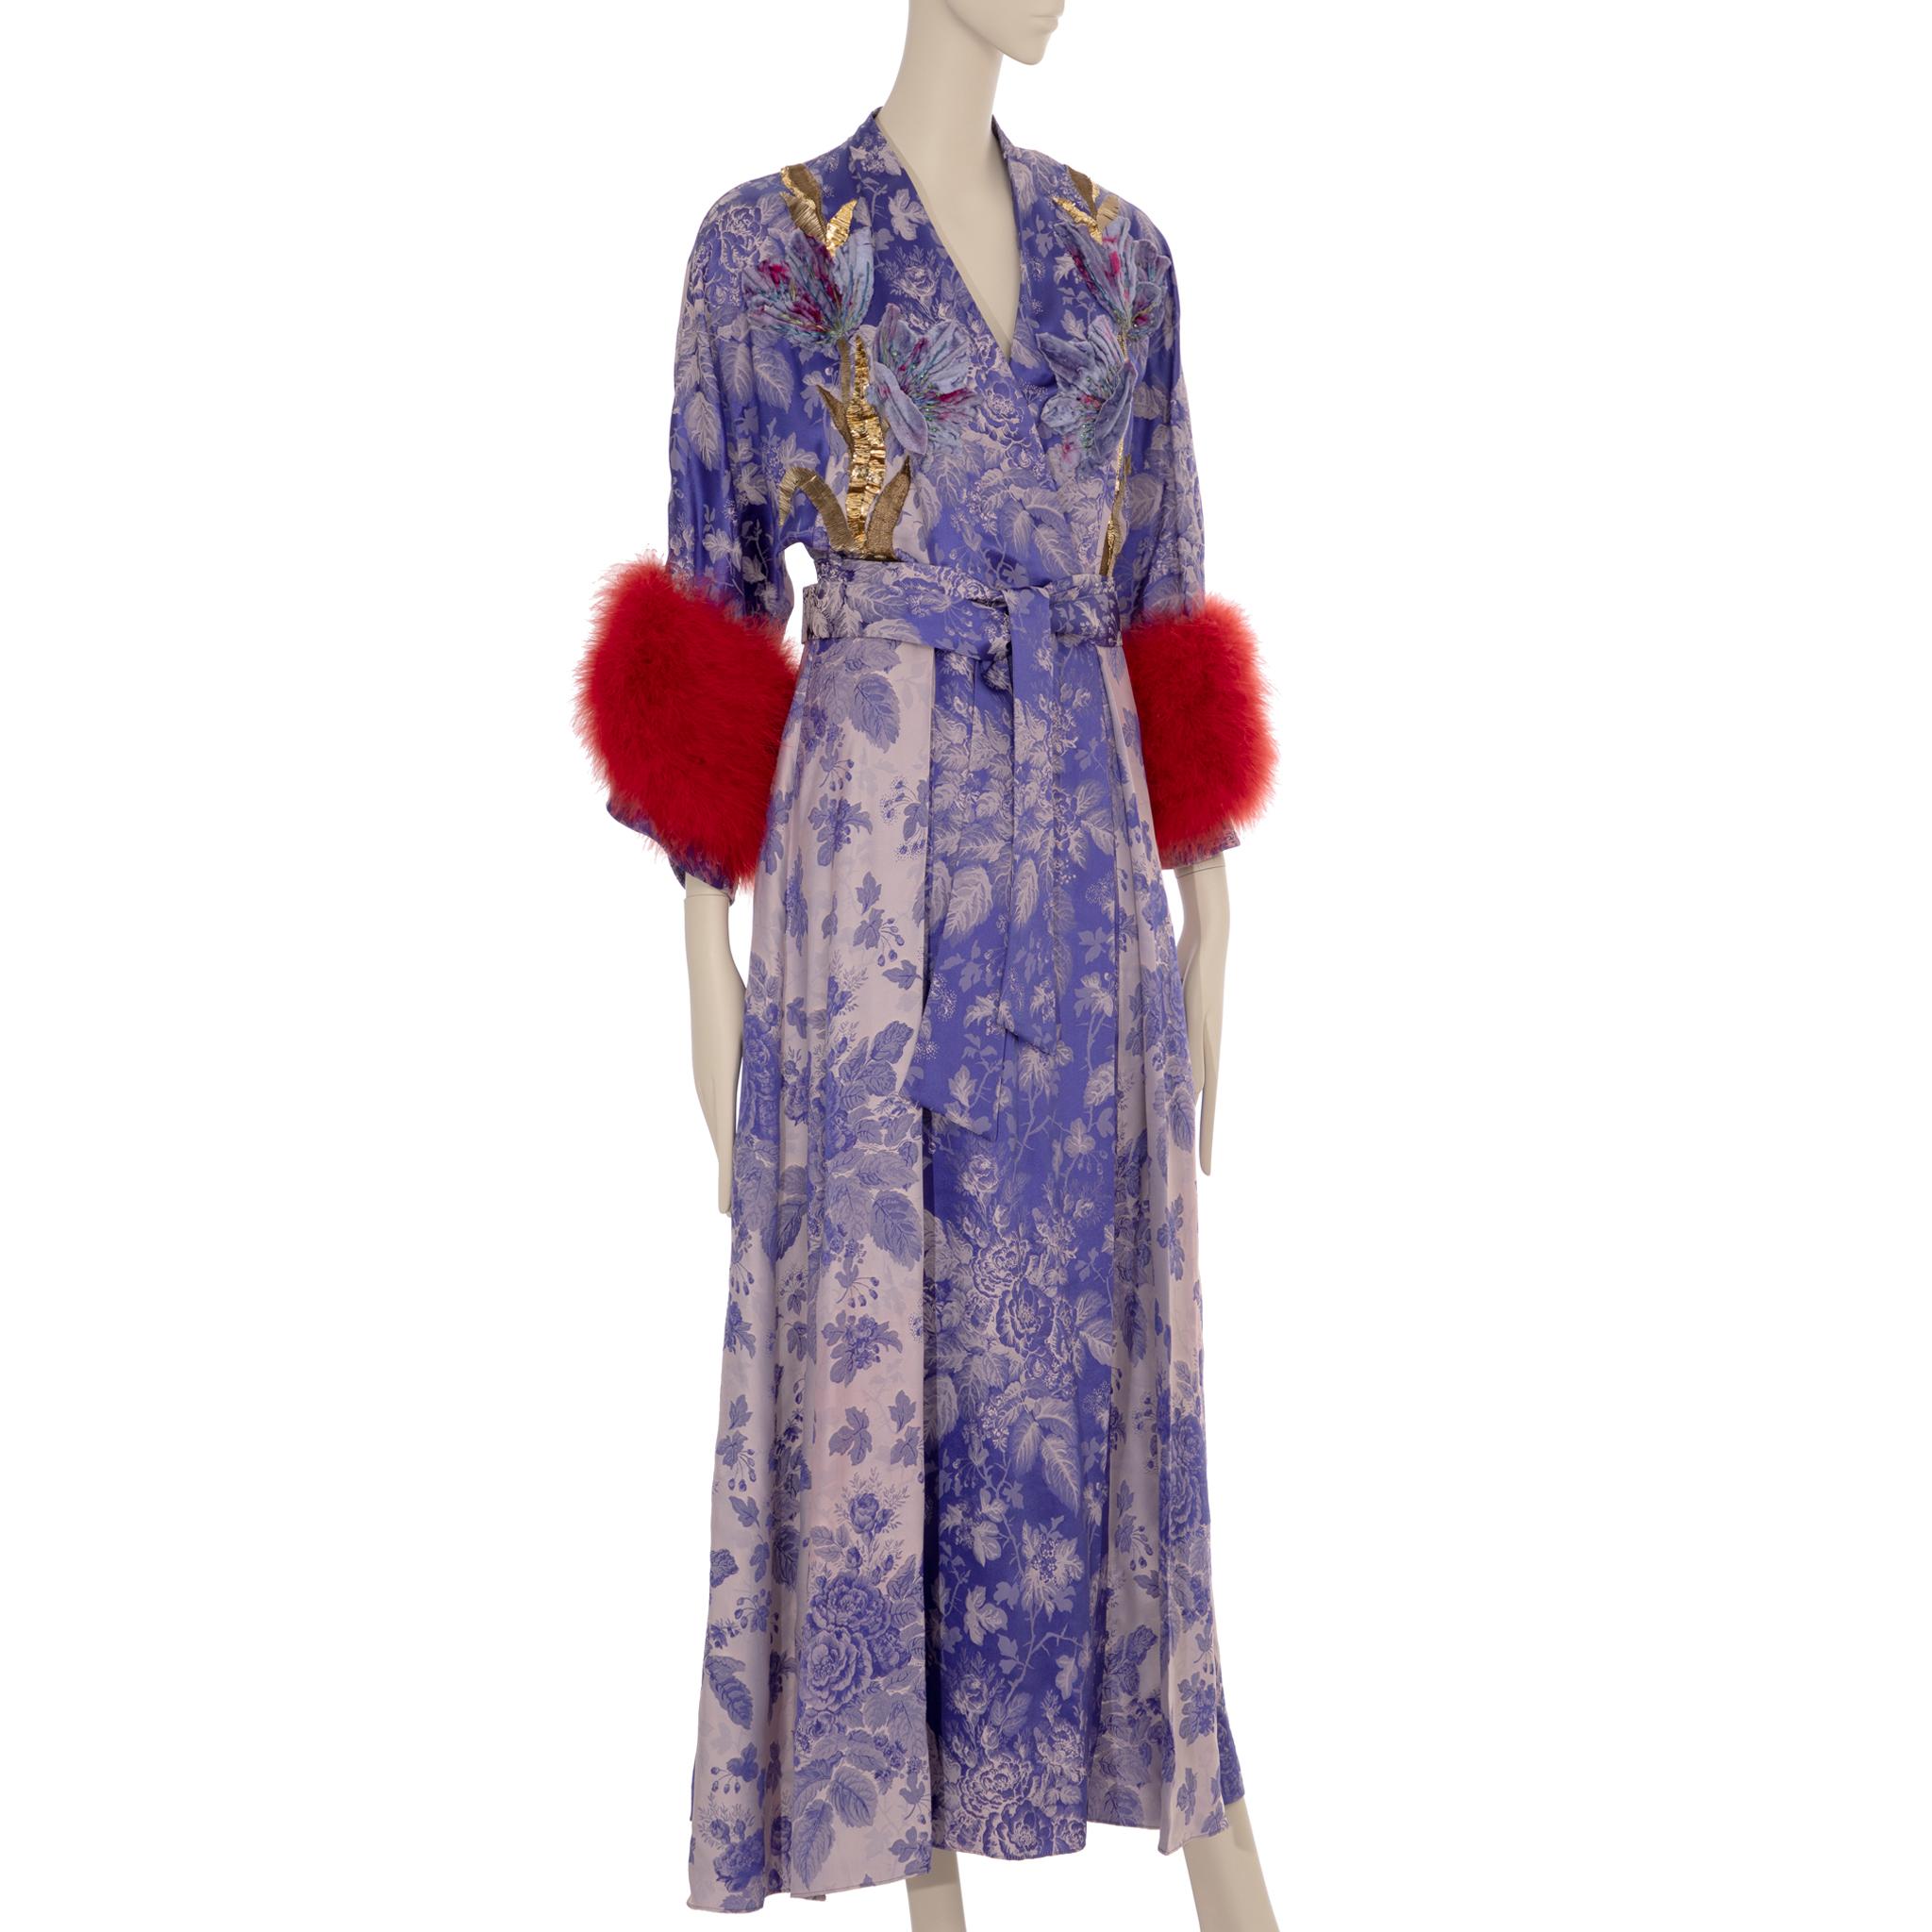 Gucci Floral Jacquard Wrap Dress With Ostrich Feathers 38 It For Sale 4